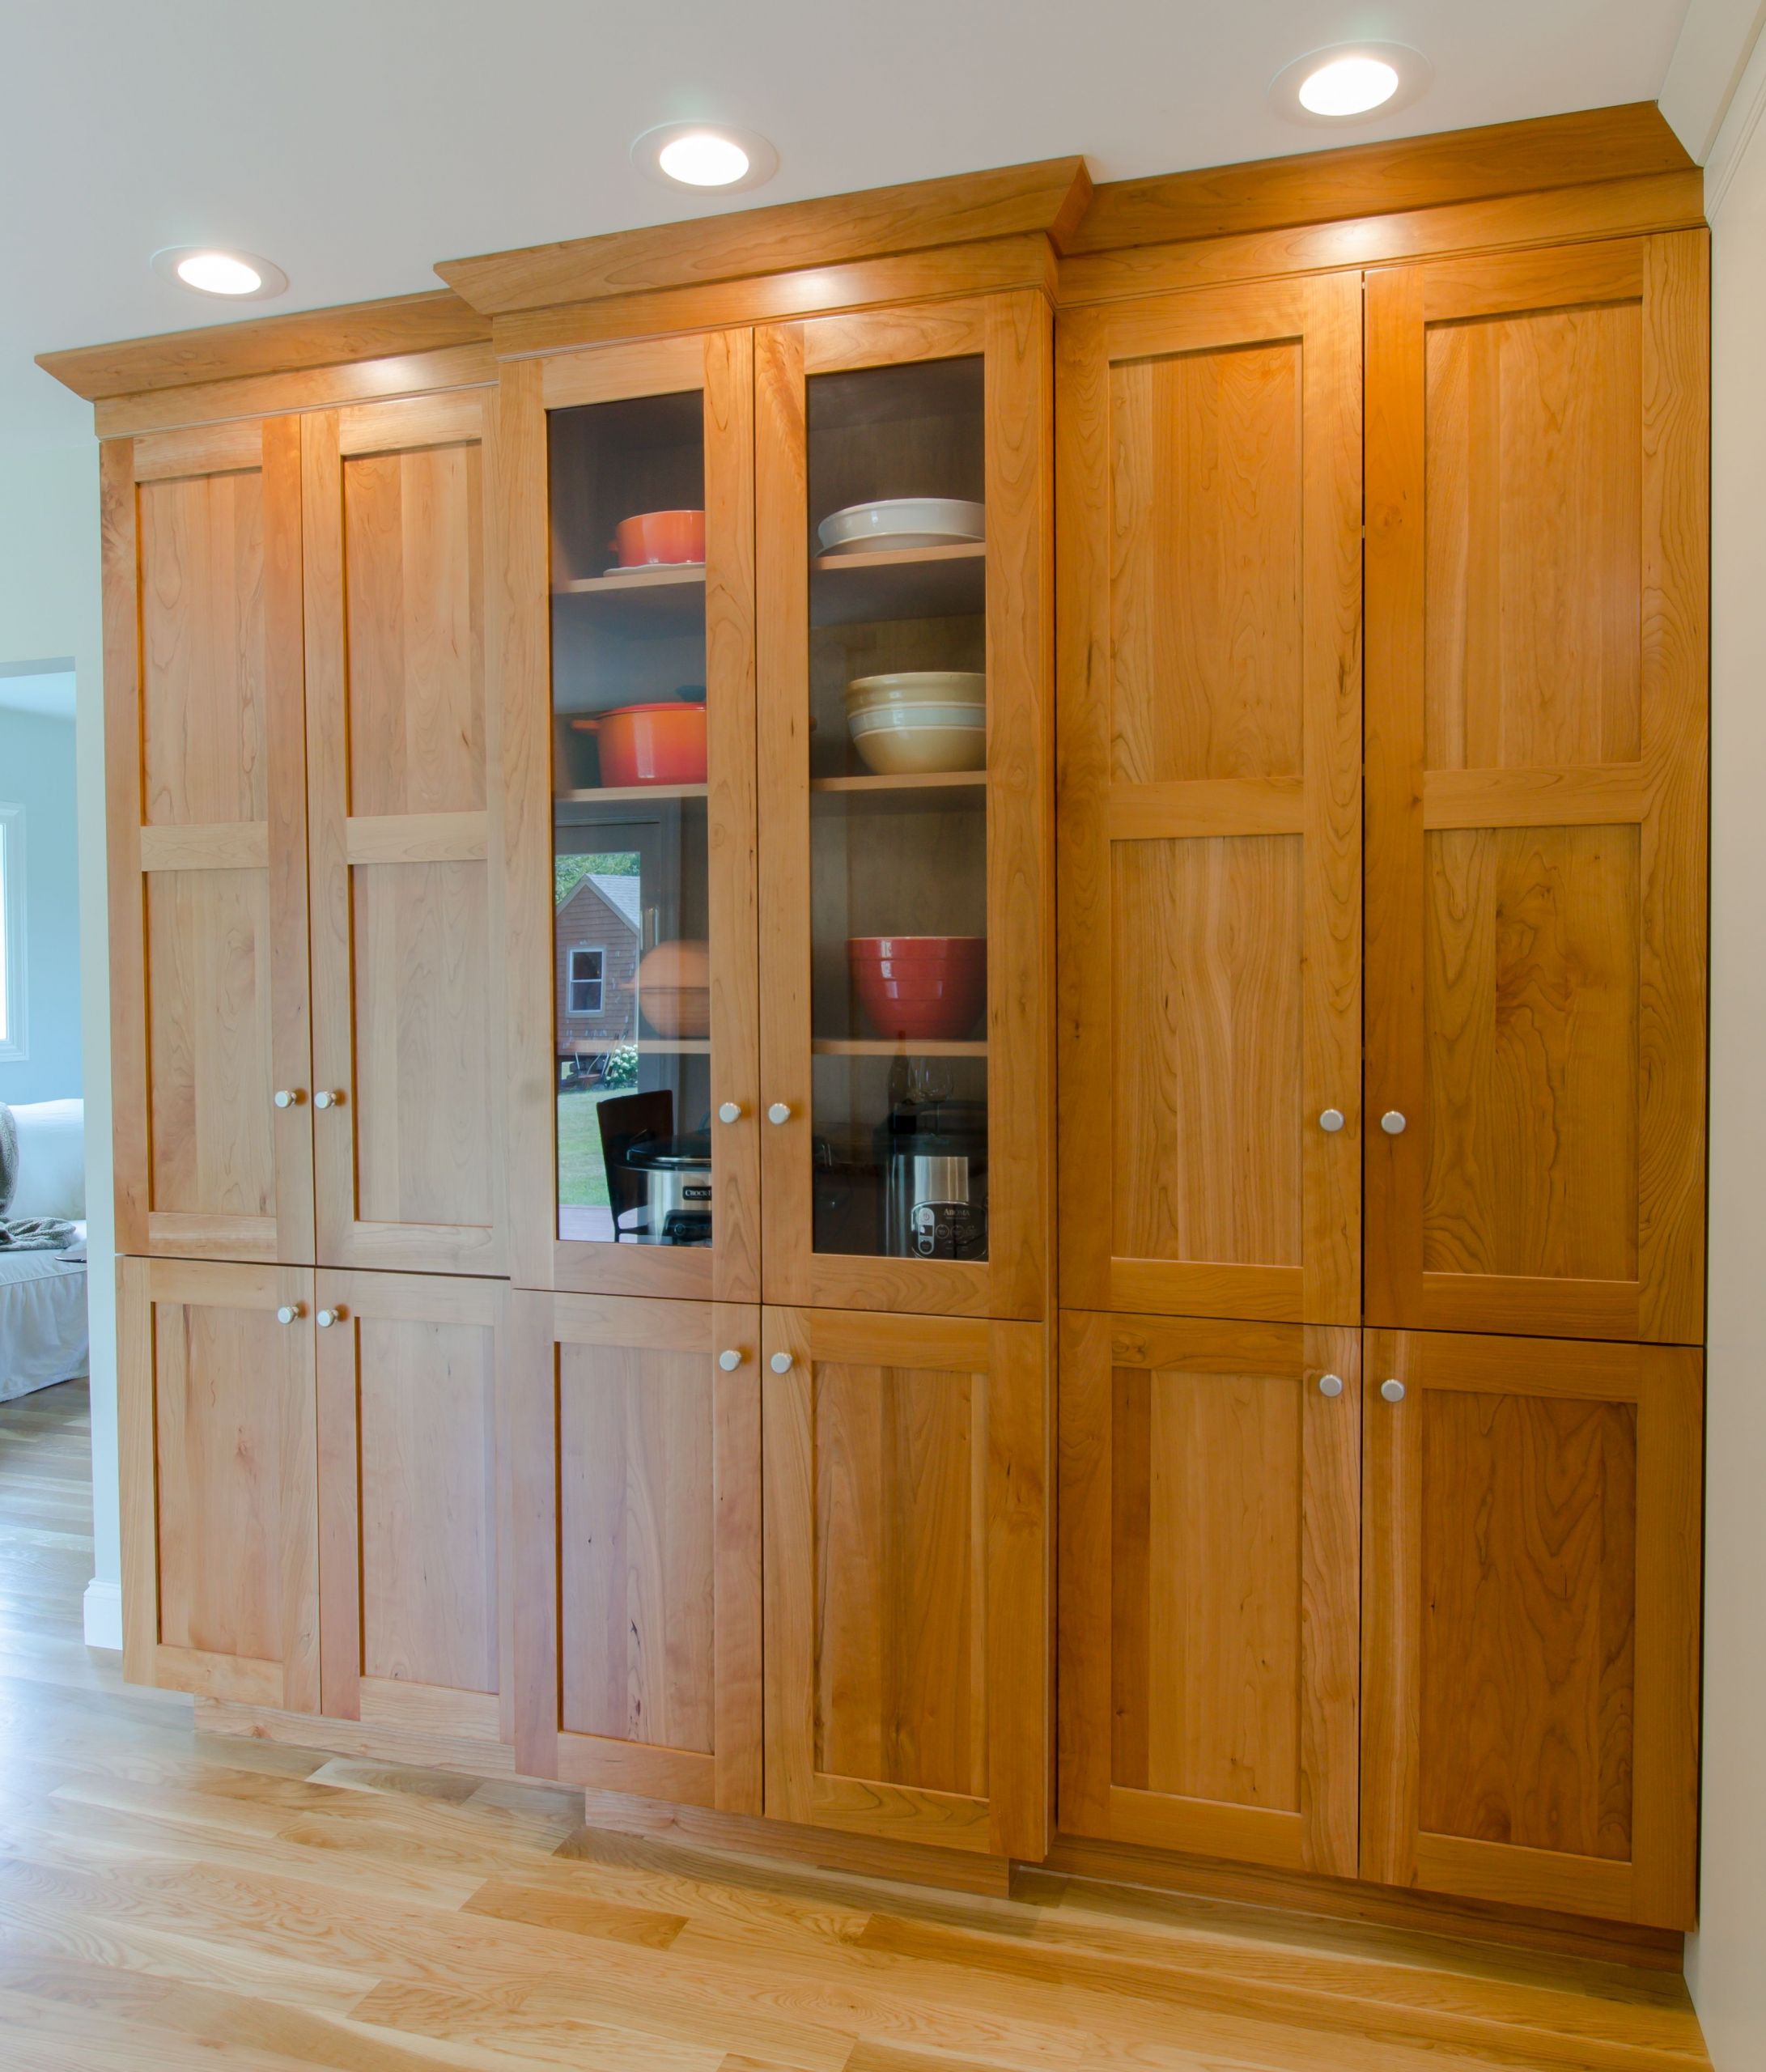 Large Kitchen Storage Cabinets
 Kitchen Pantry pantry cabinet in natural cherry